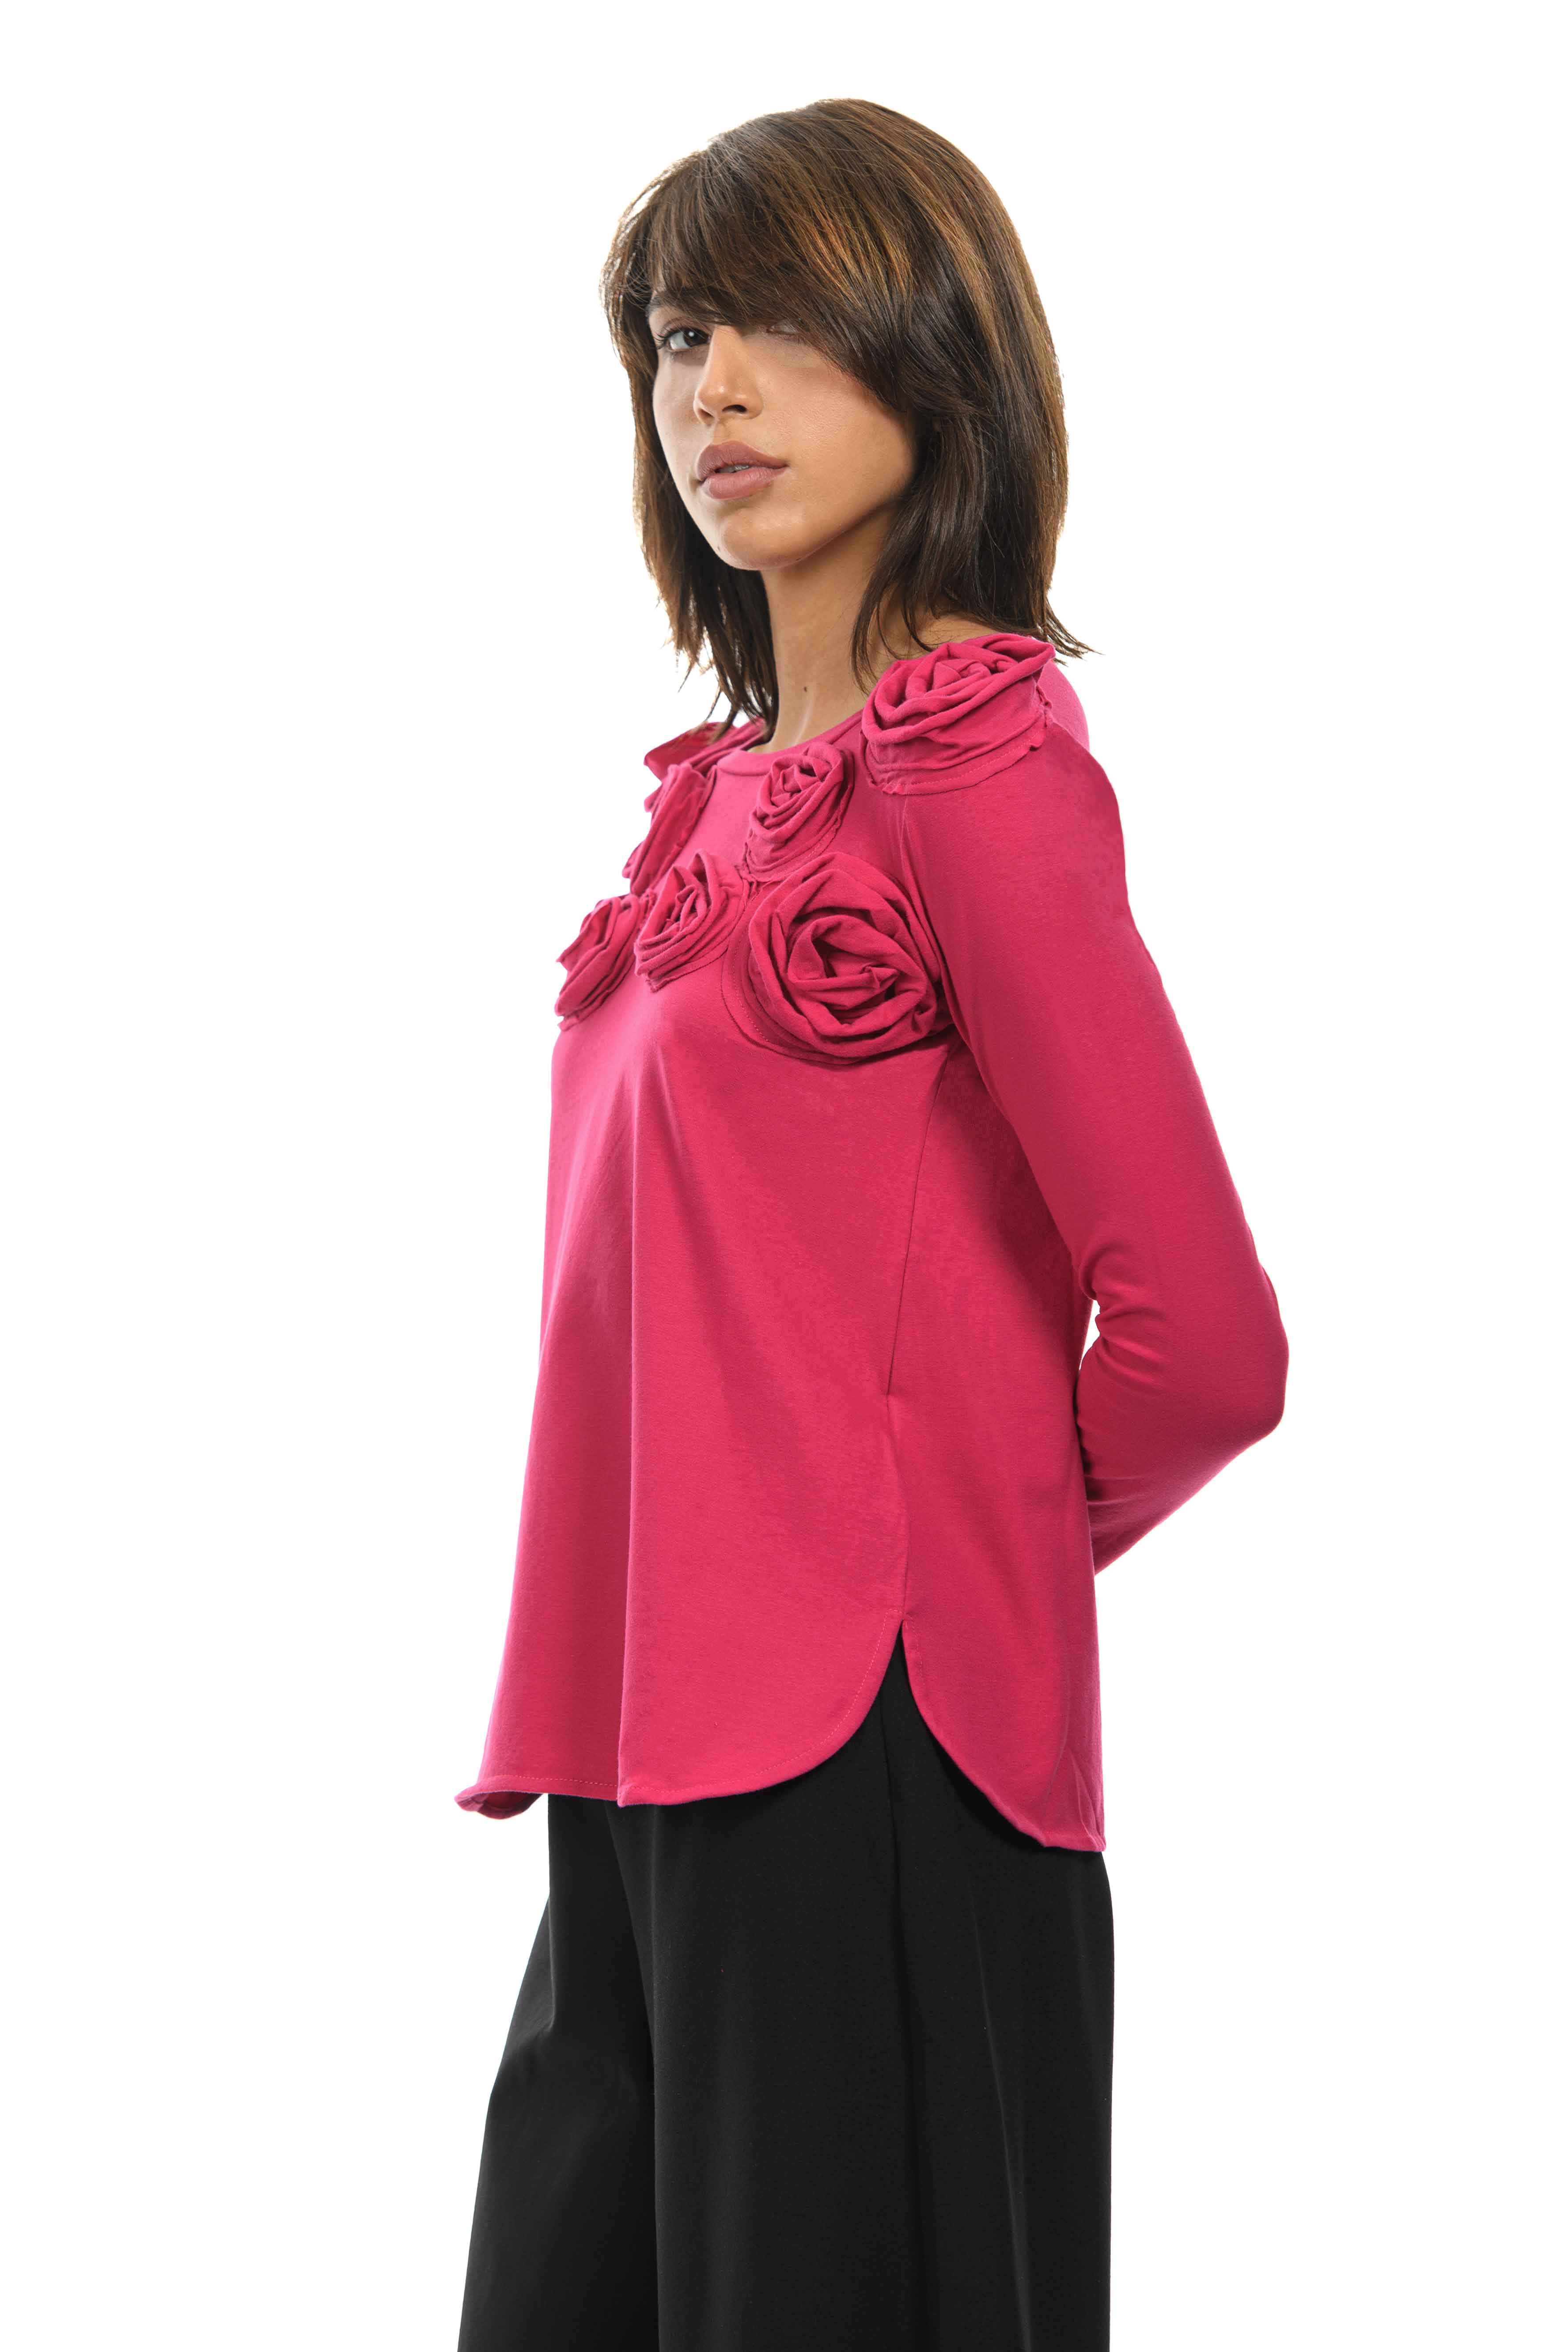 GERTRUDE Sweater with roses